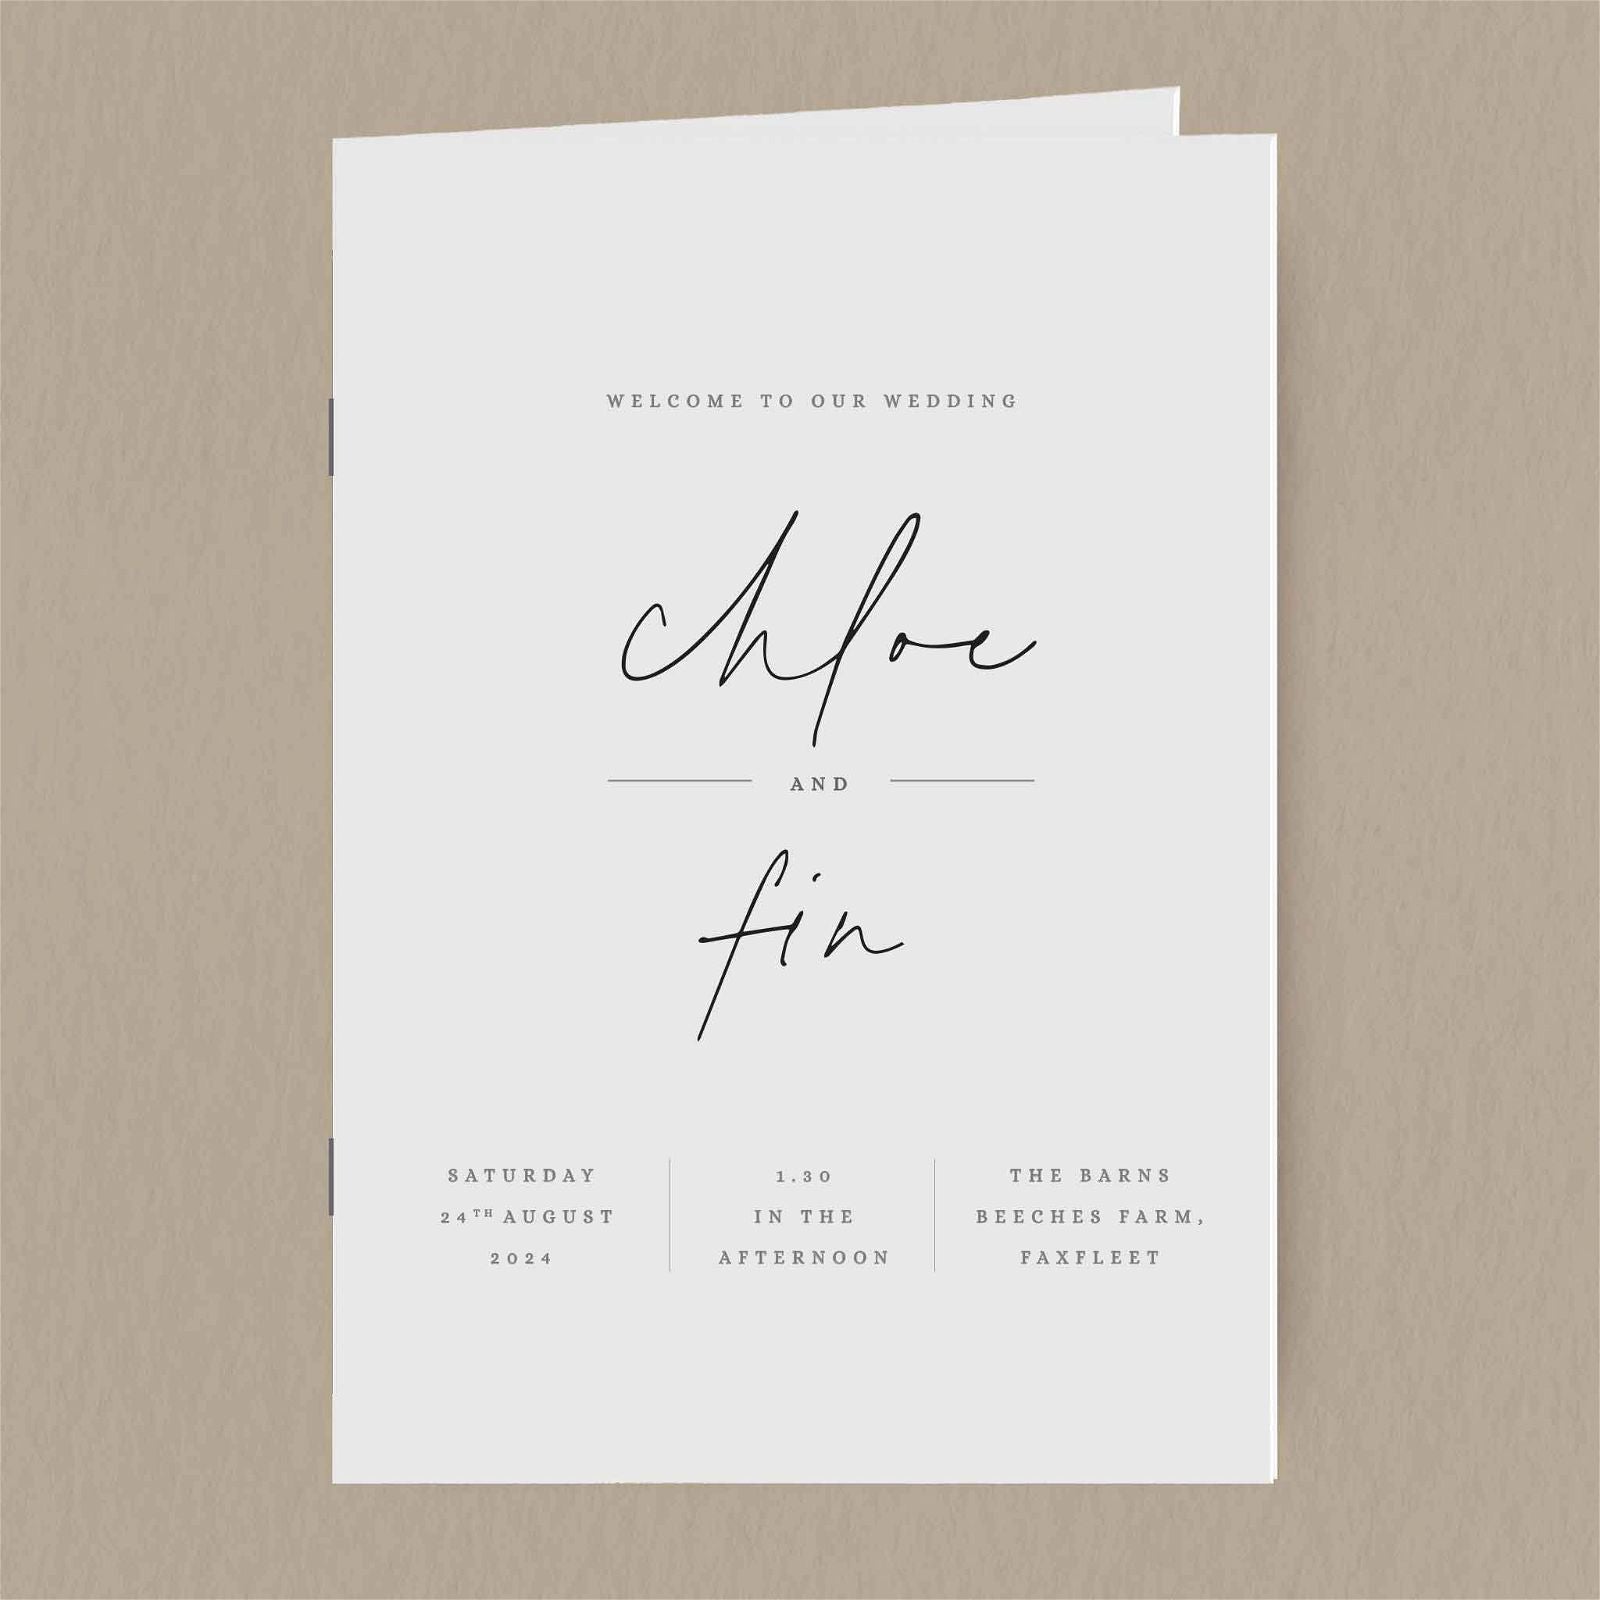 Chloe Order Of Service  Ivy and Gold Wedding Stationery   